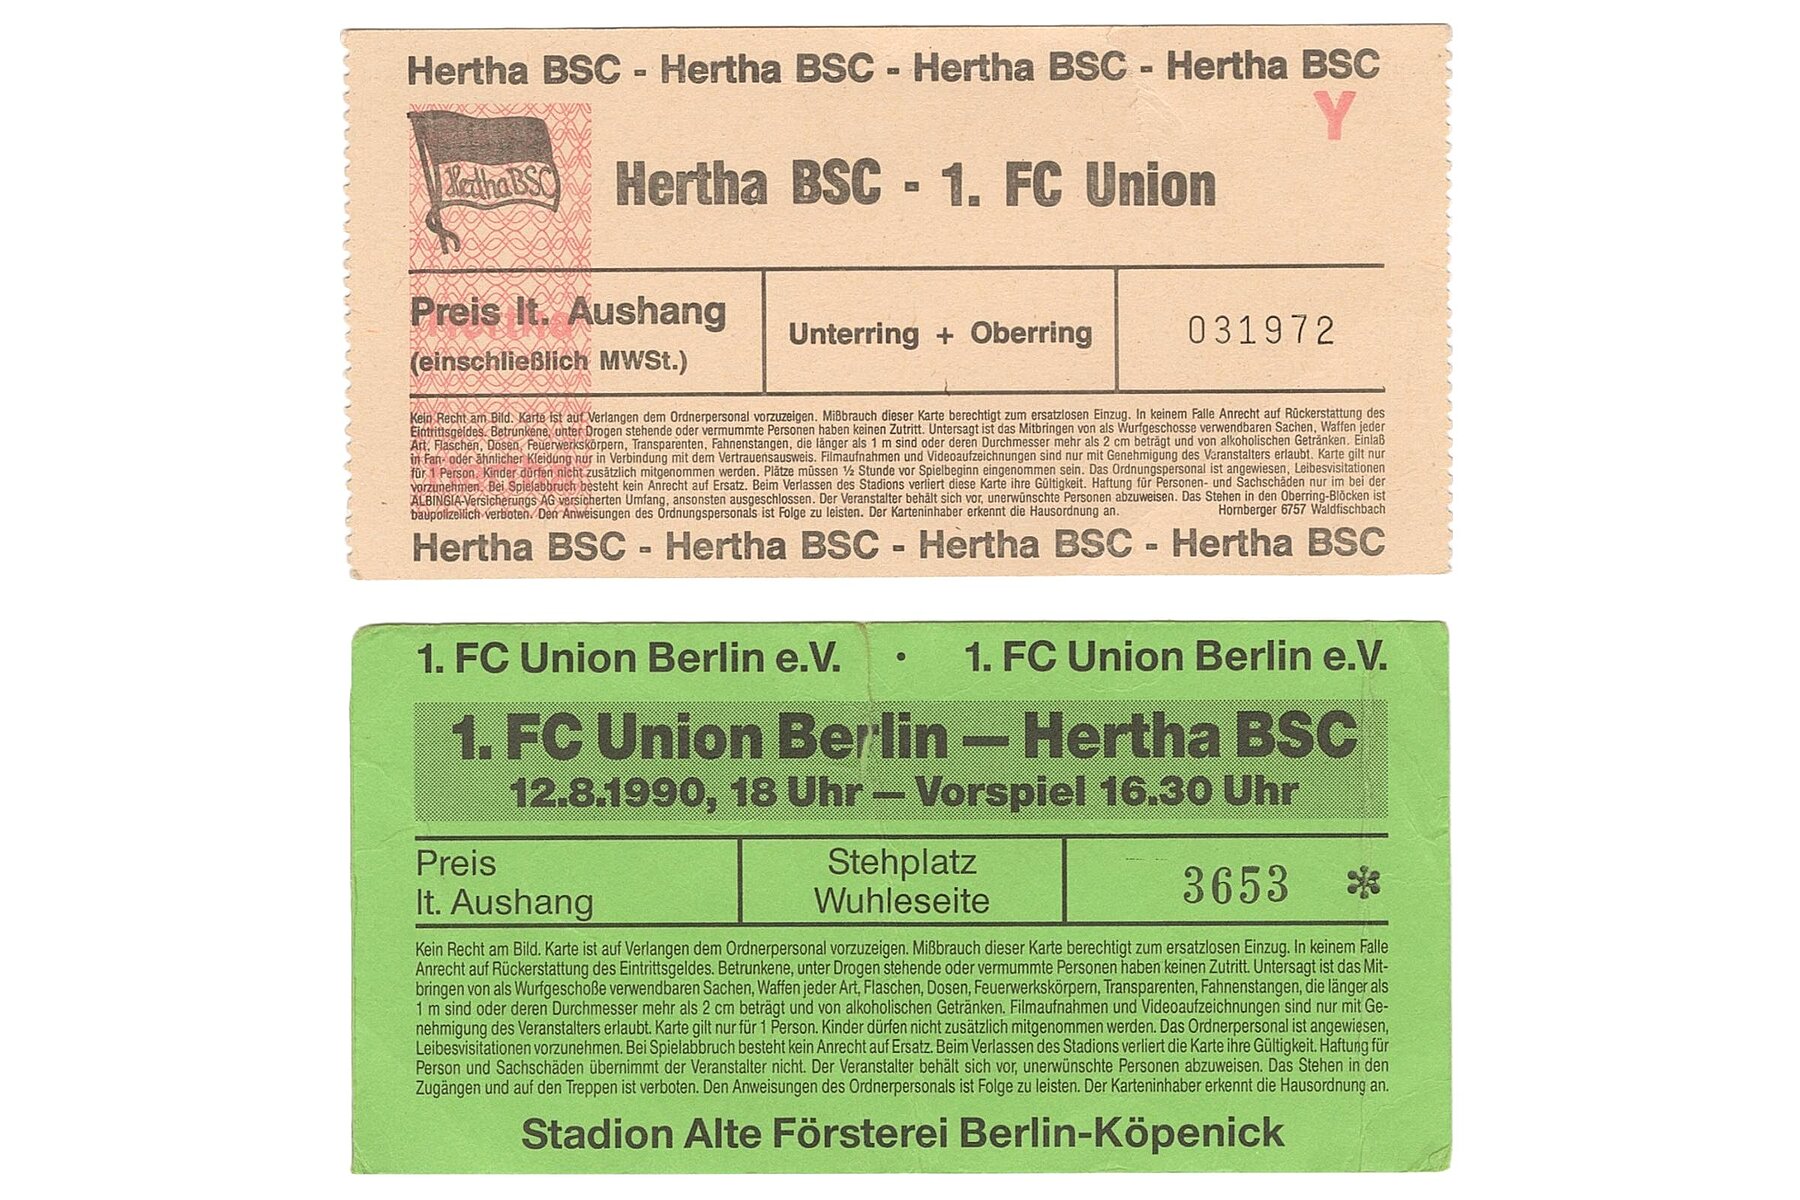 Tickets for the second leg of Union versus Hertha.